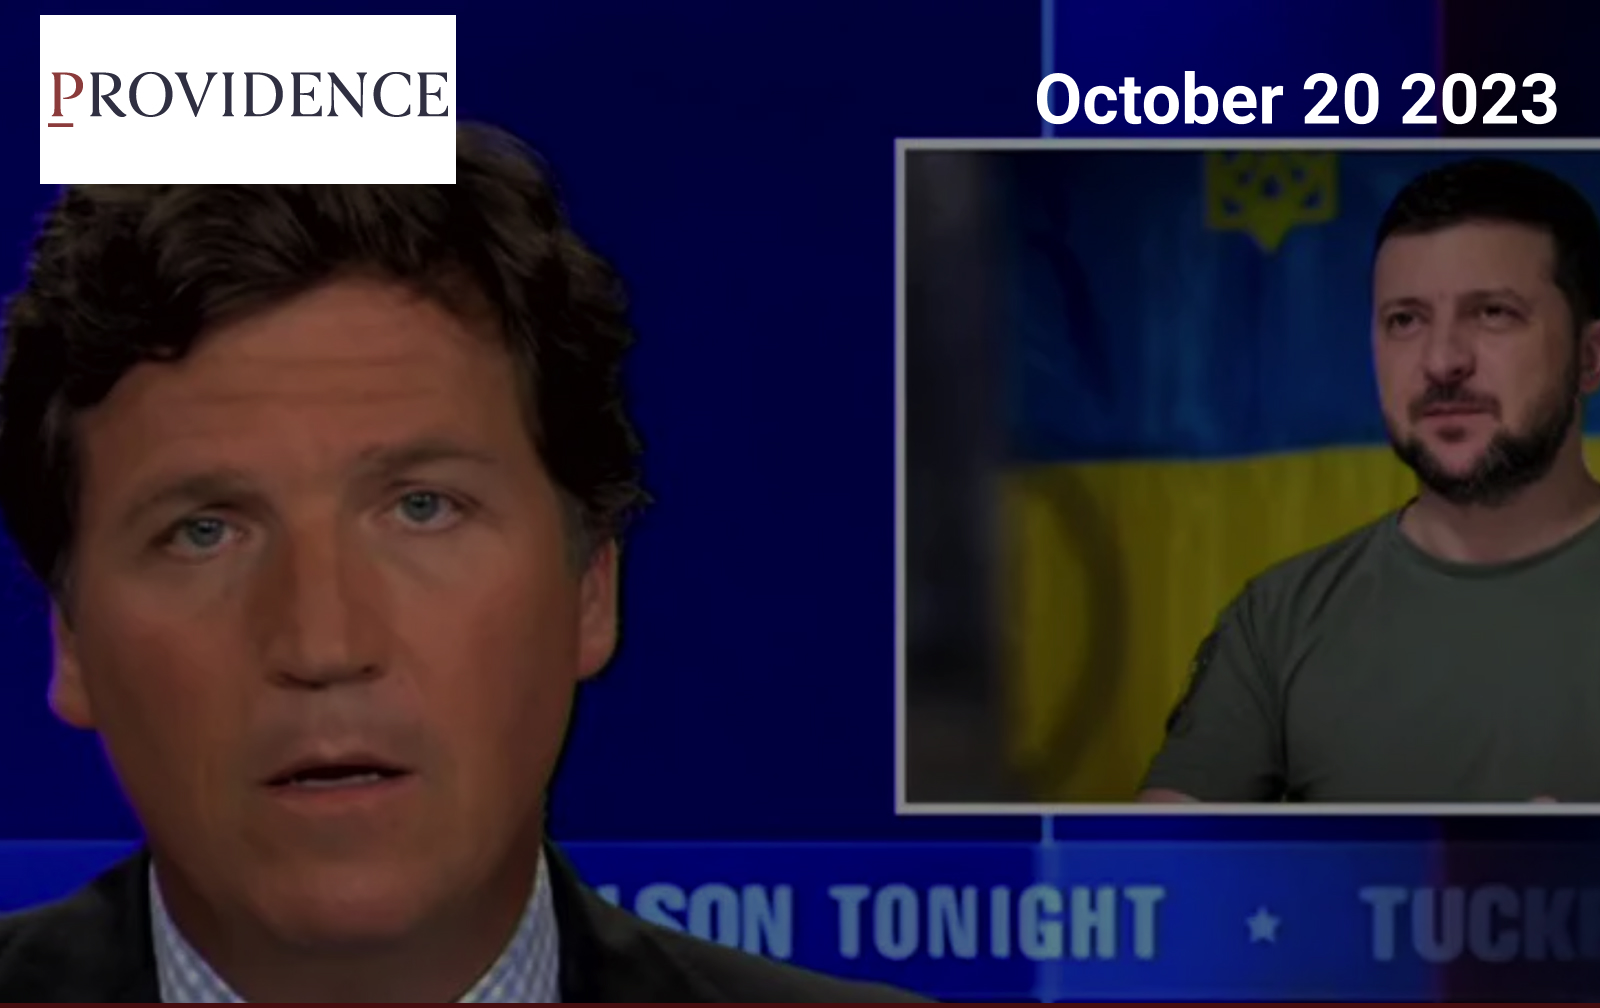 Tucker Carlson is Wrong: Putin Practices Religious Persecution, Not Zelensky